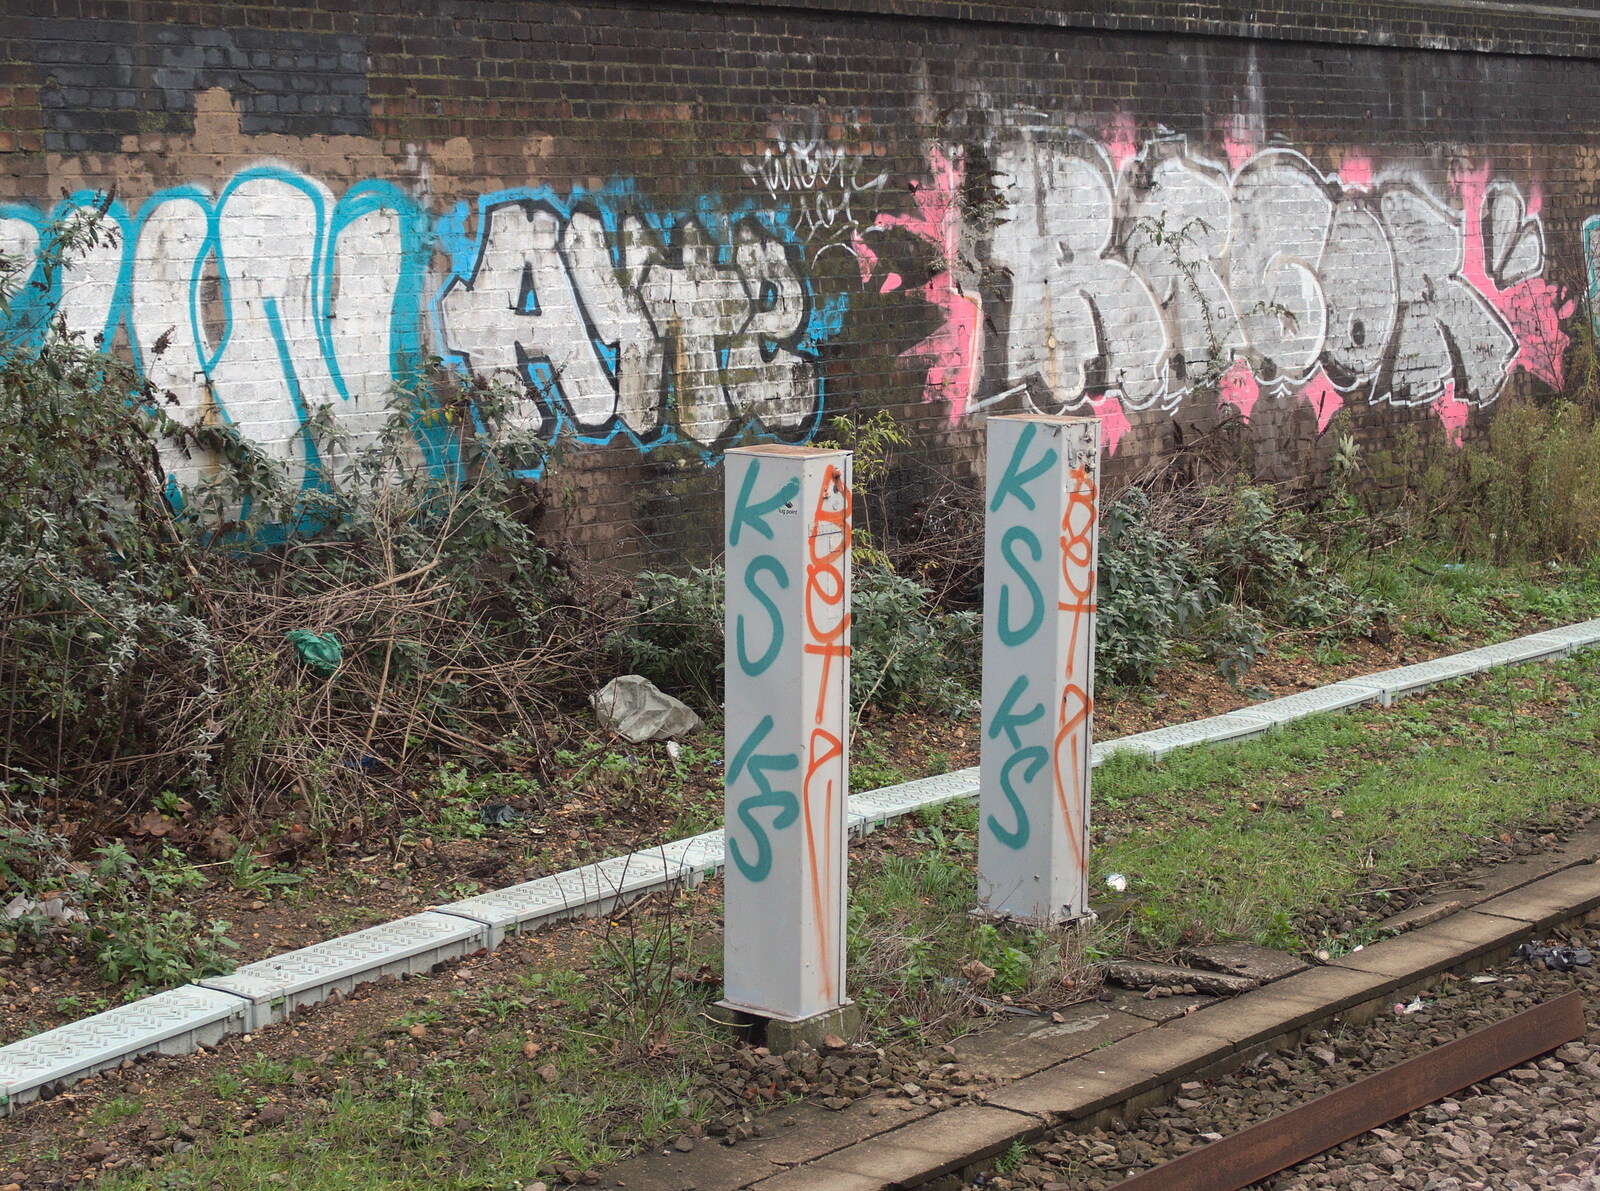 Trackside graffiti from A London Lunch, Borough, Southwark - 15th December 2015